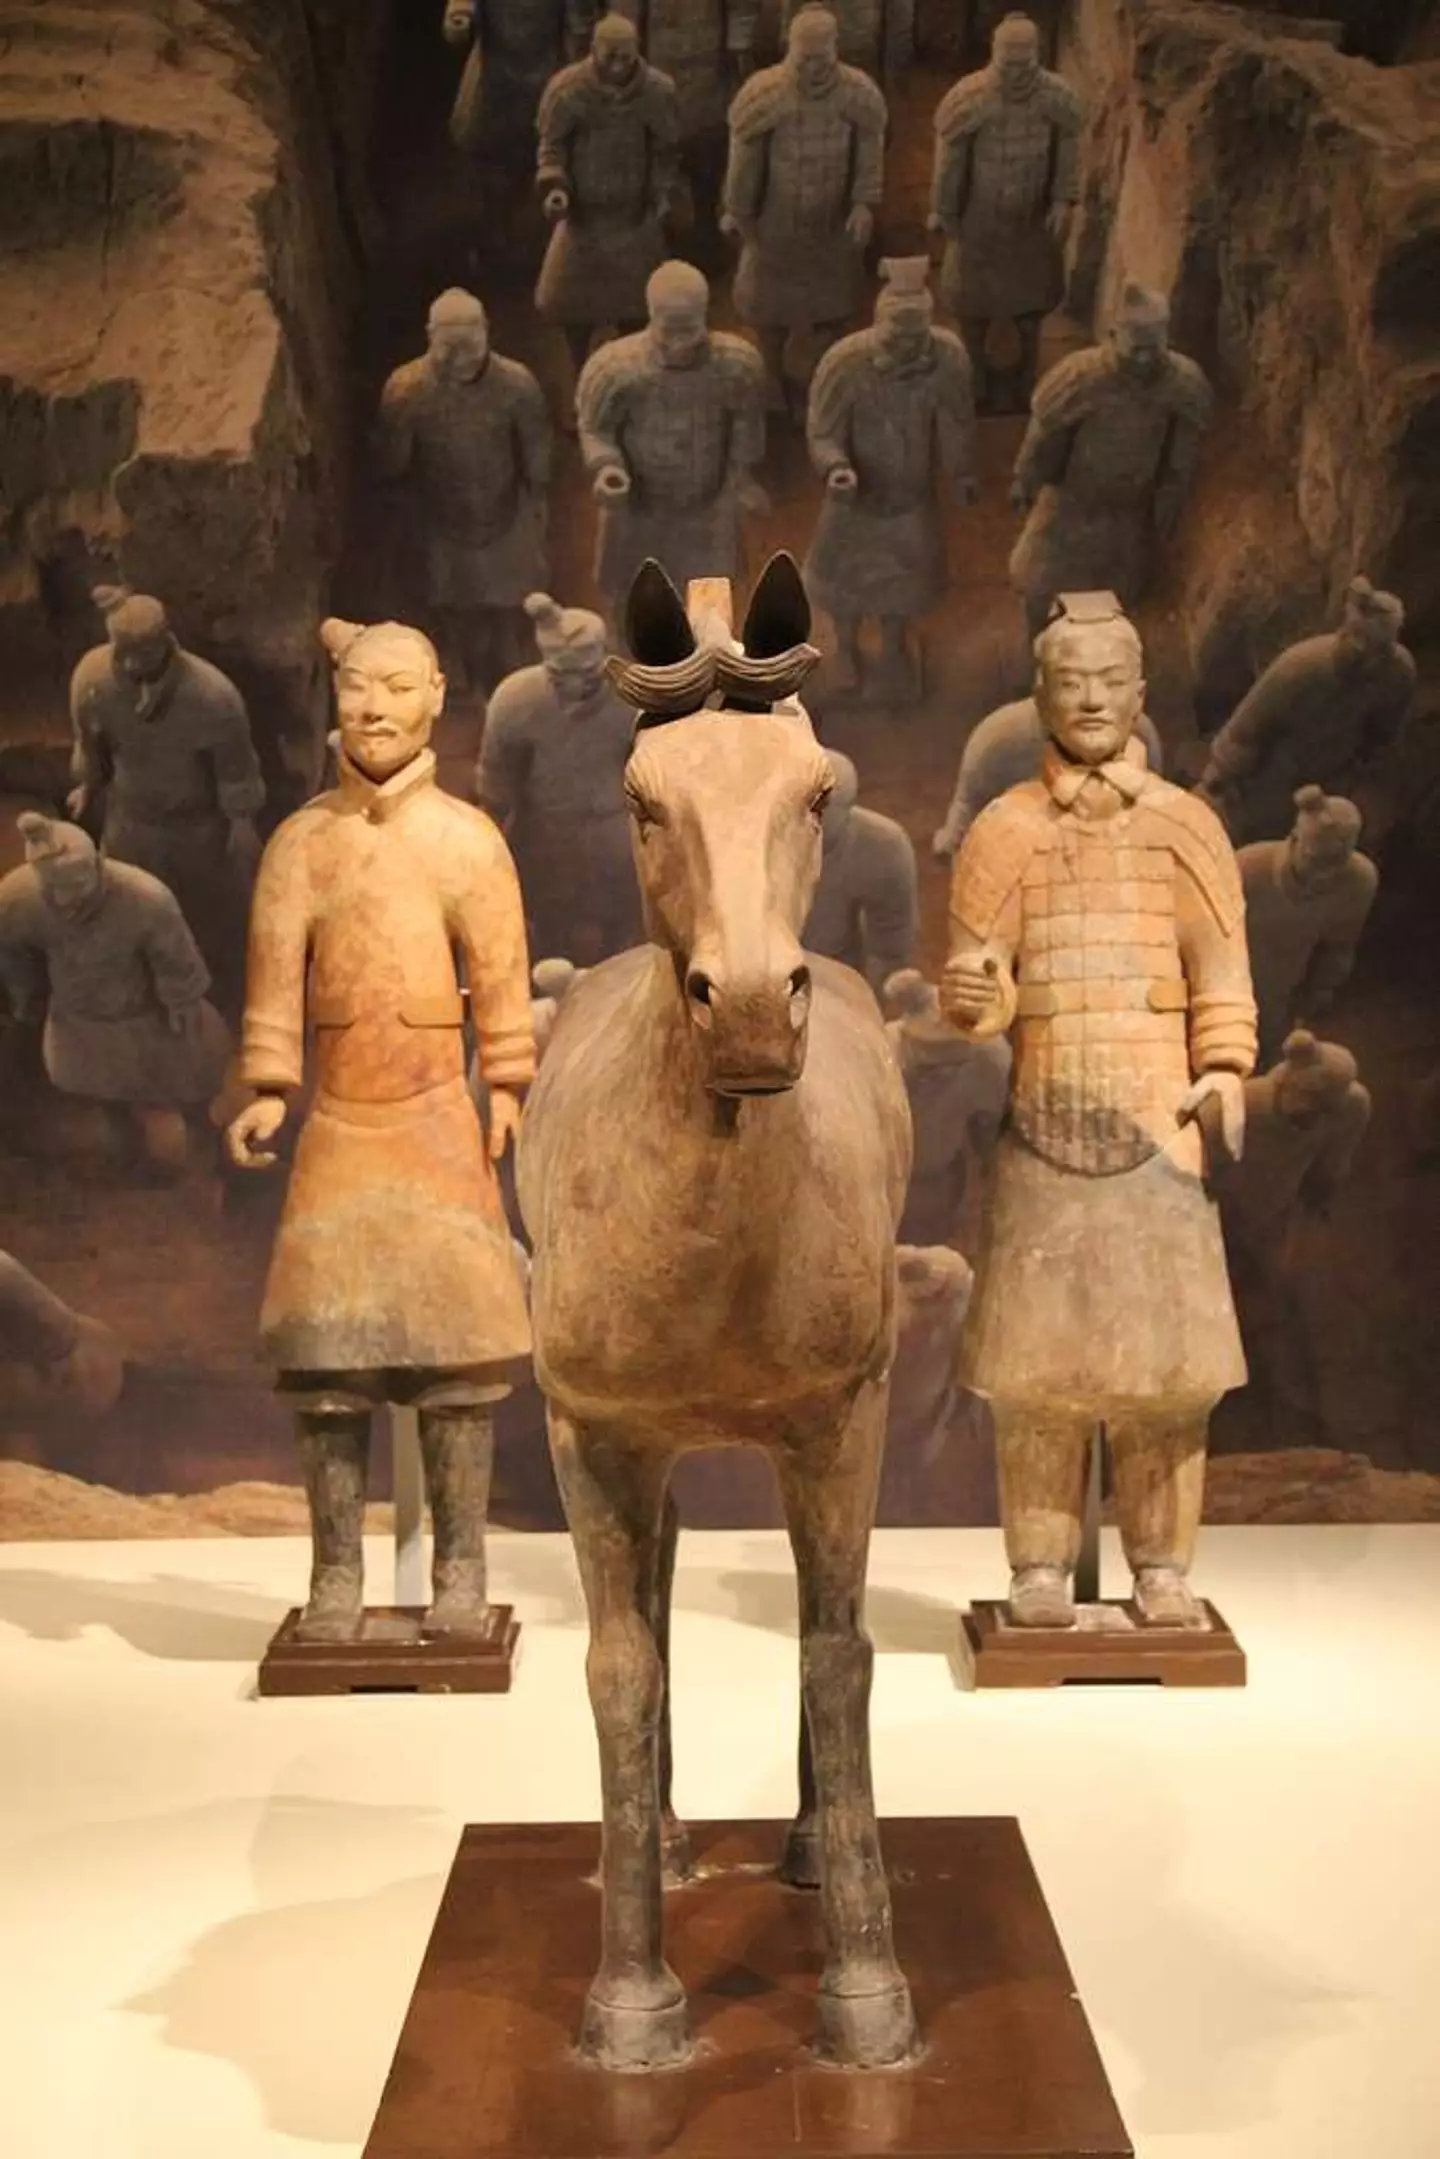 Part of the Terracotta Army.